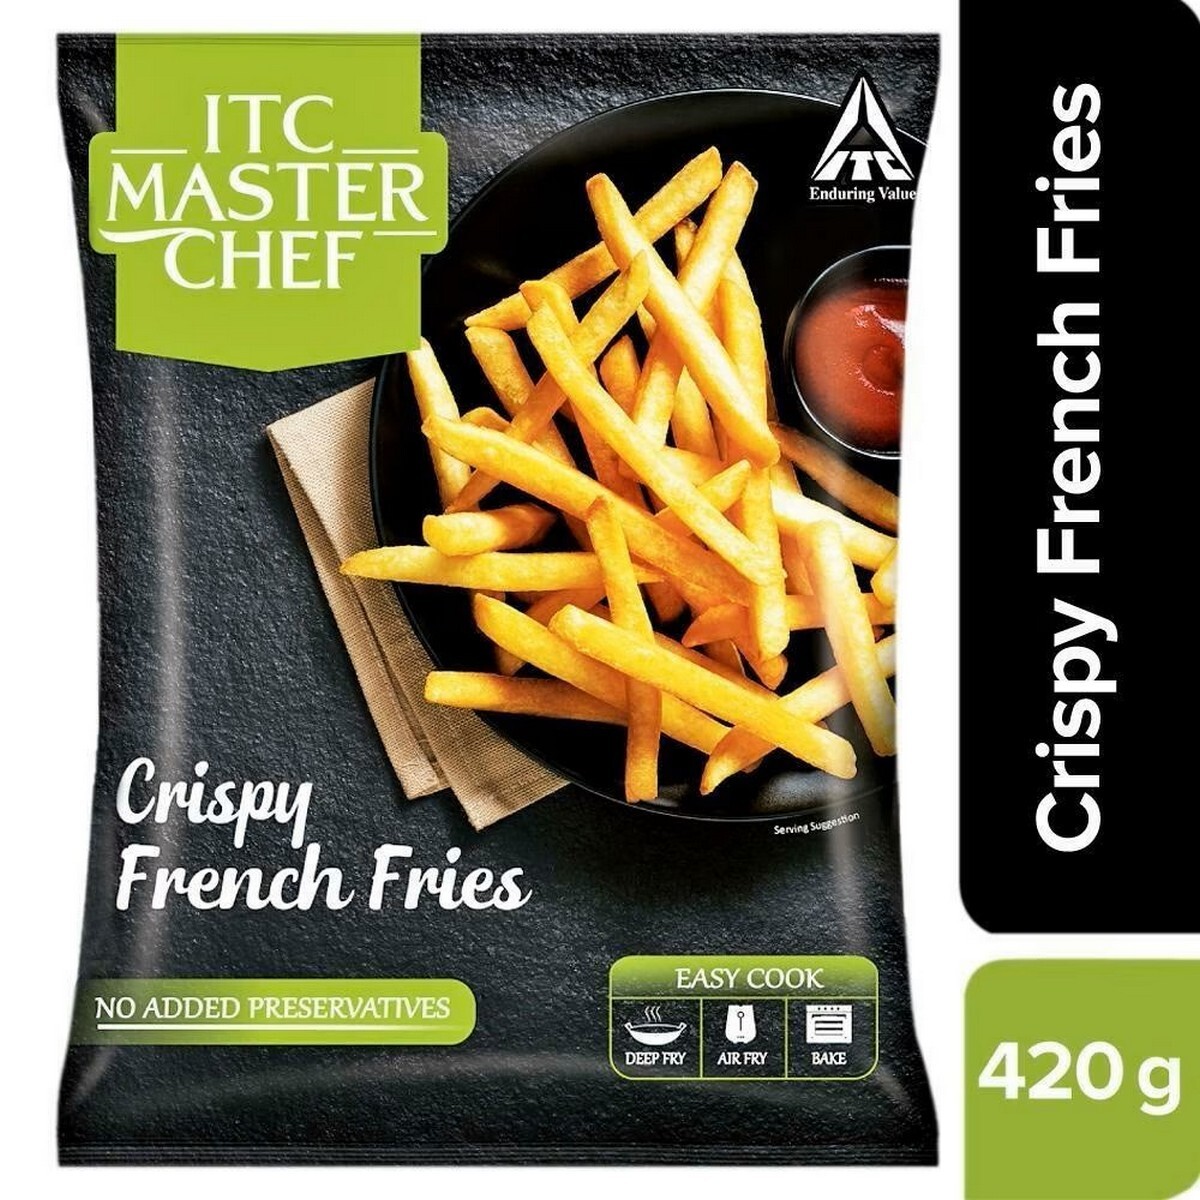 ITC Master Chef French Fries 420g